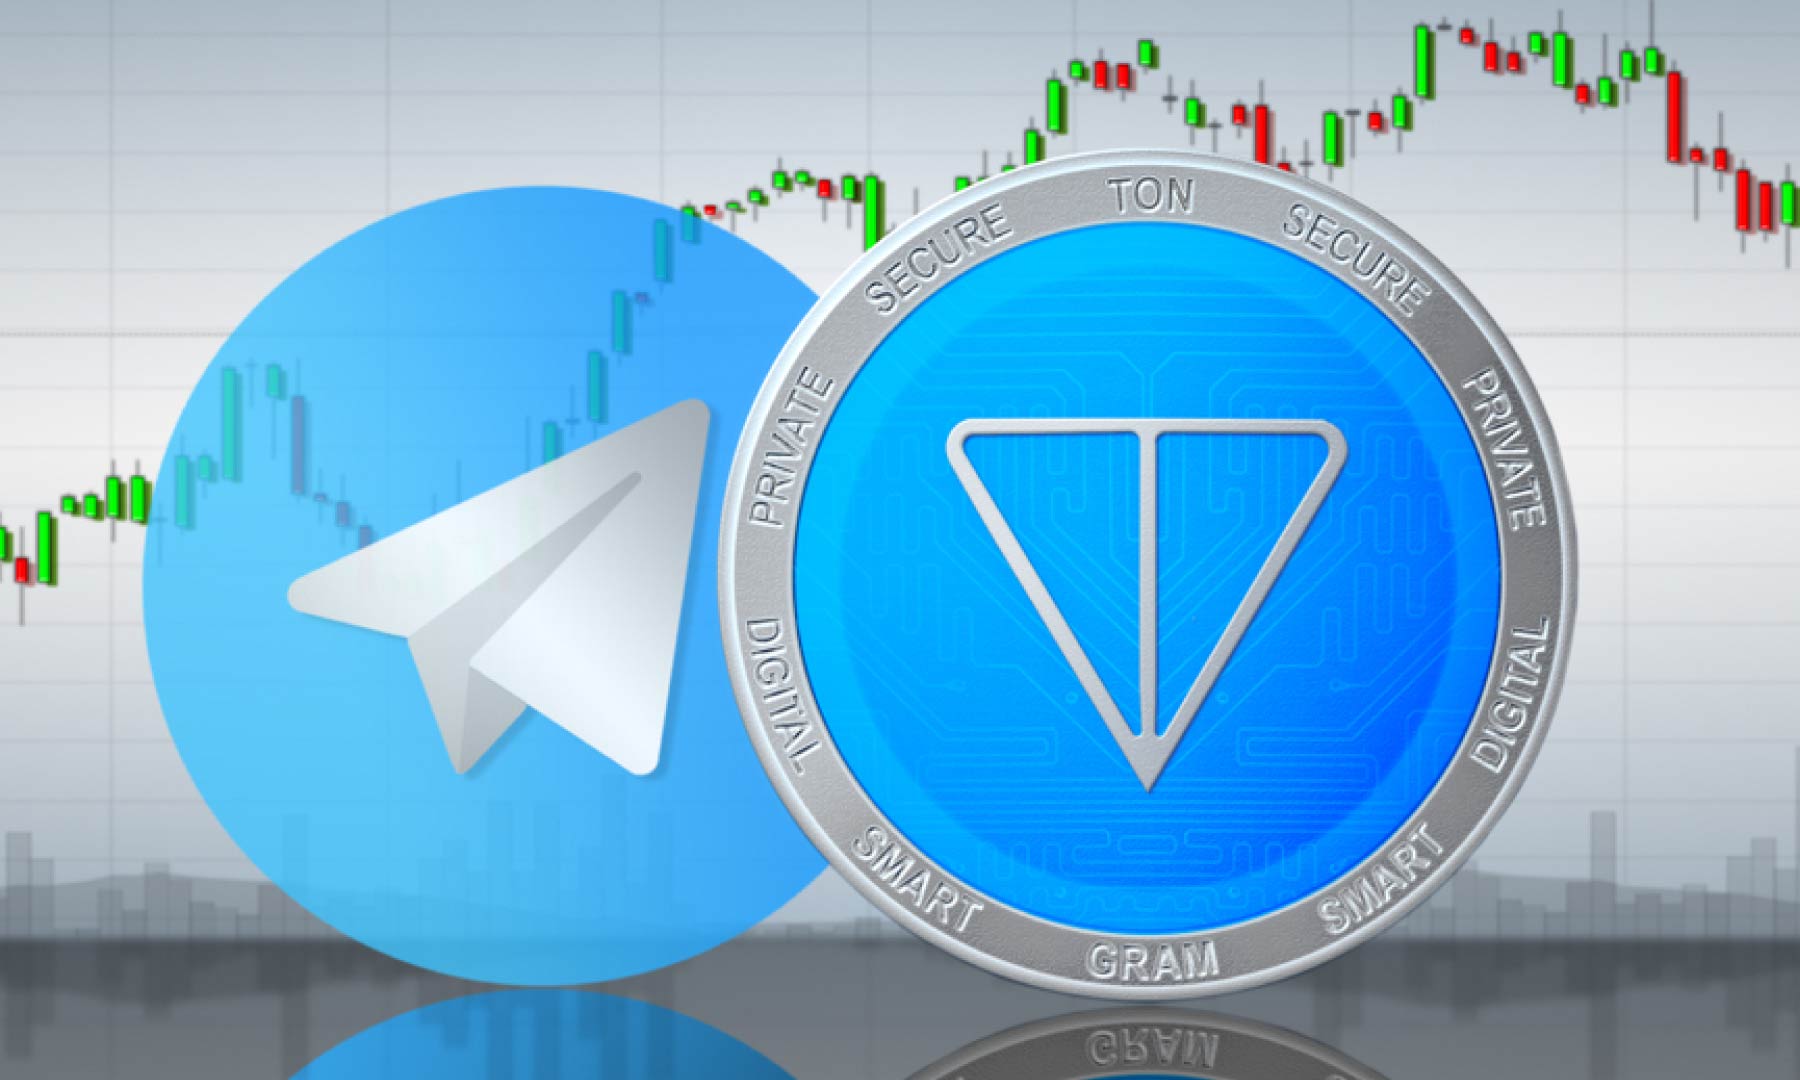 Telegram launches marketplace to auction rare username handles